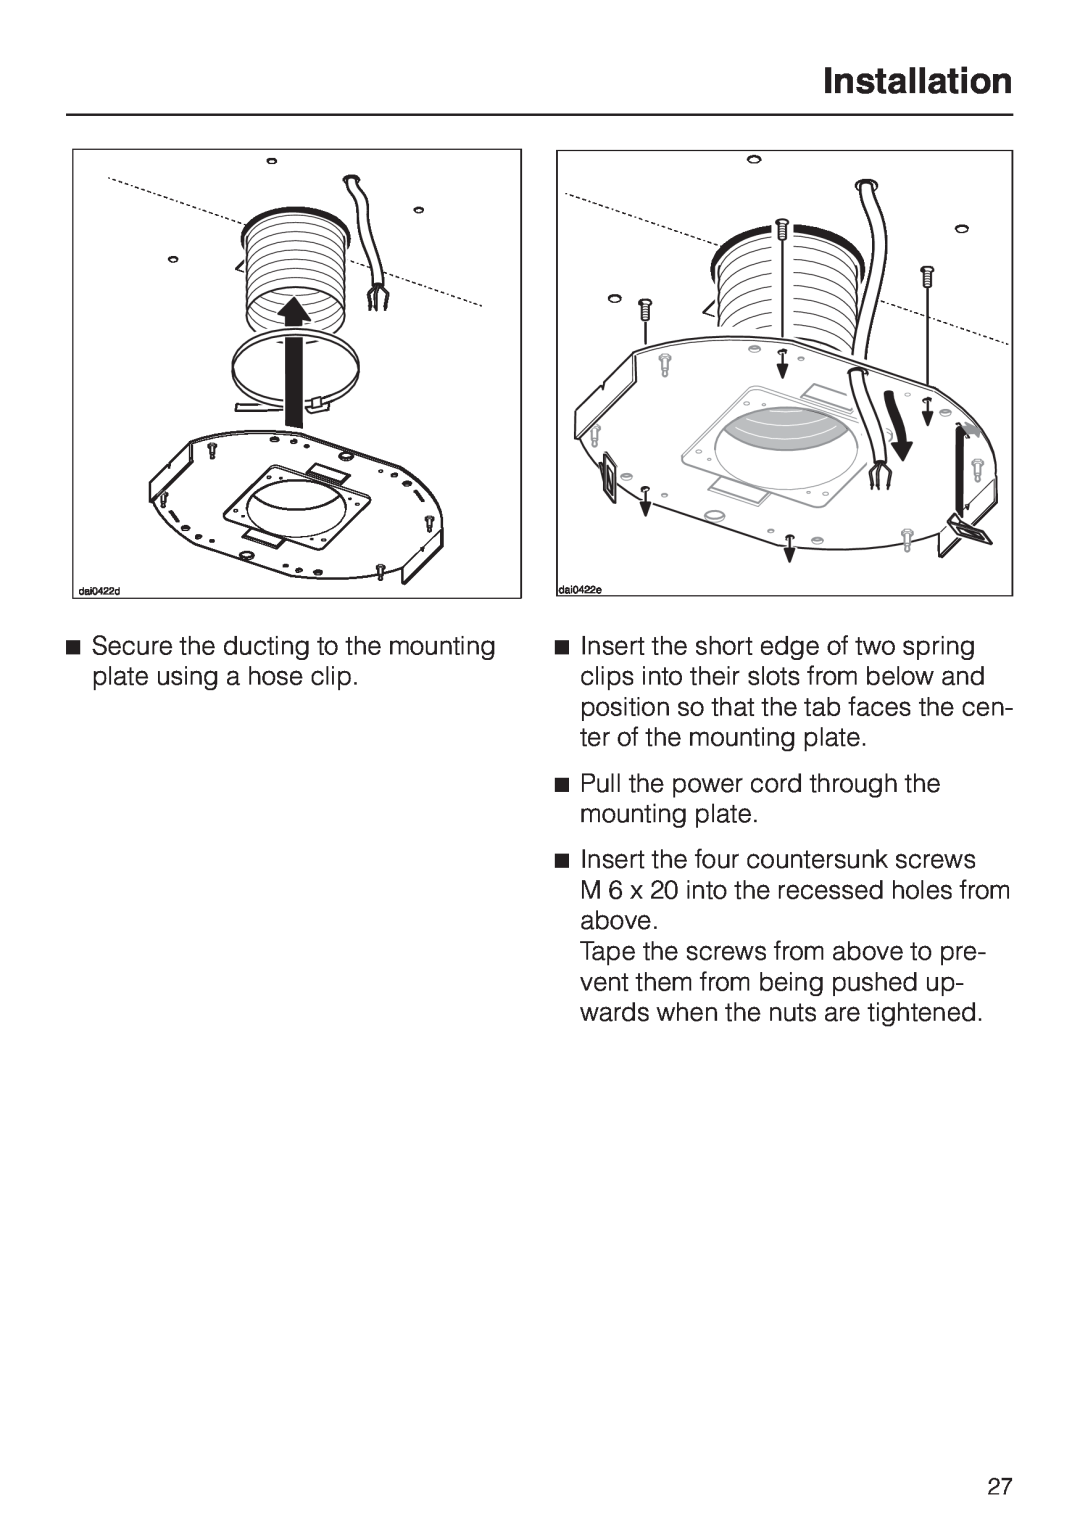 Miele DA 230-3 installation instructions Installation, Pull the power cord through the mounting plate 